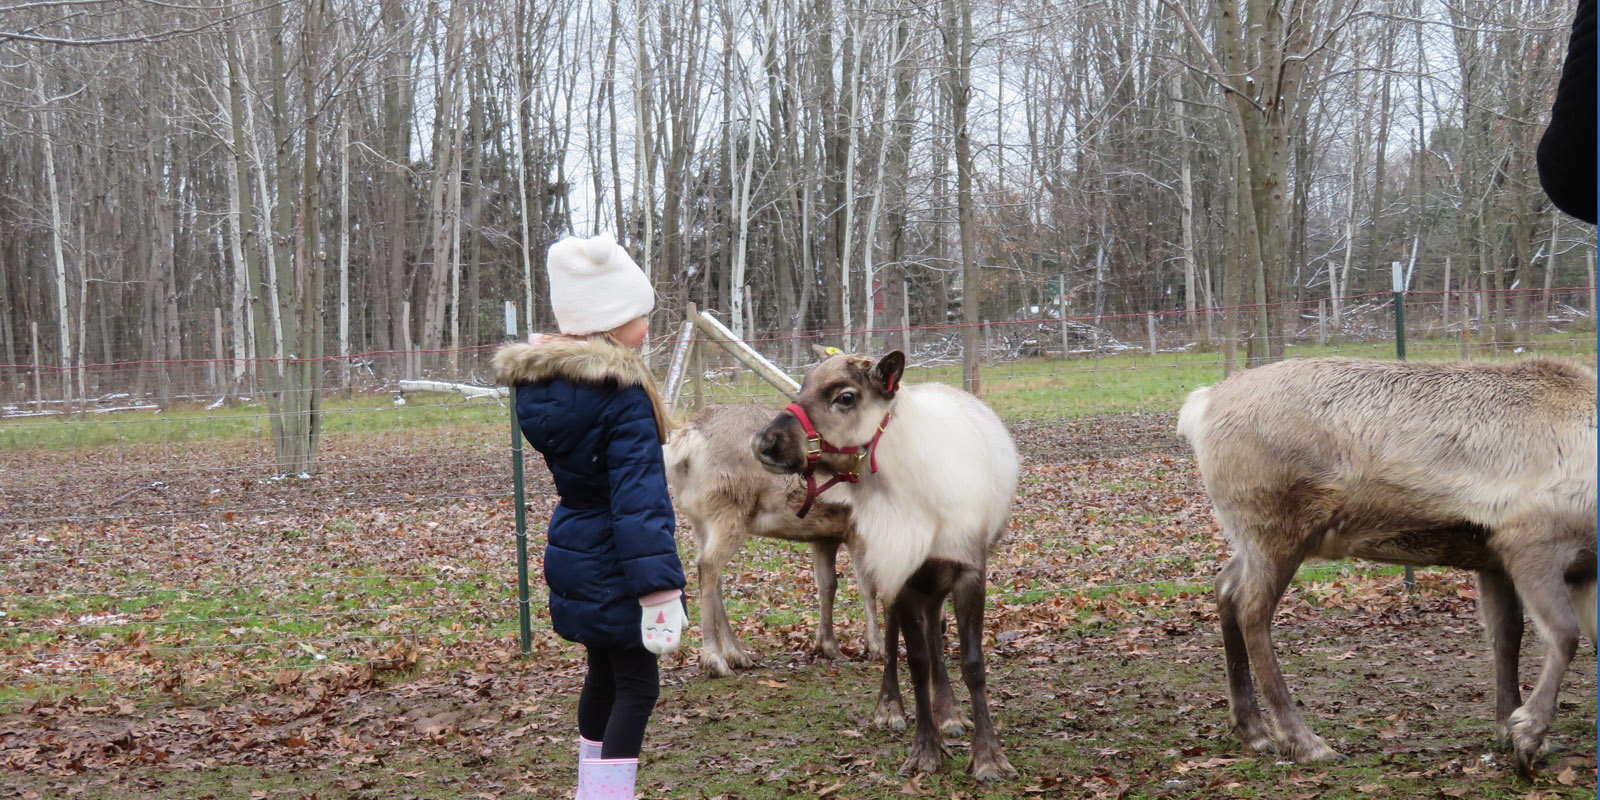 A small child looking at a small curious reindeer